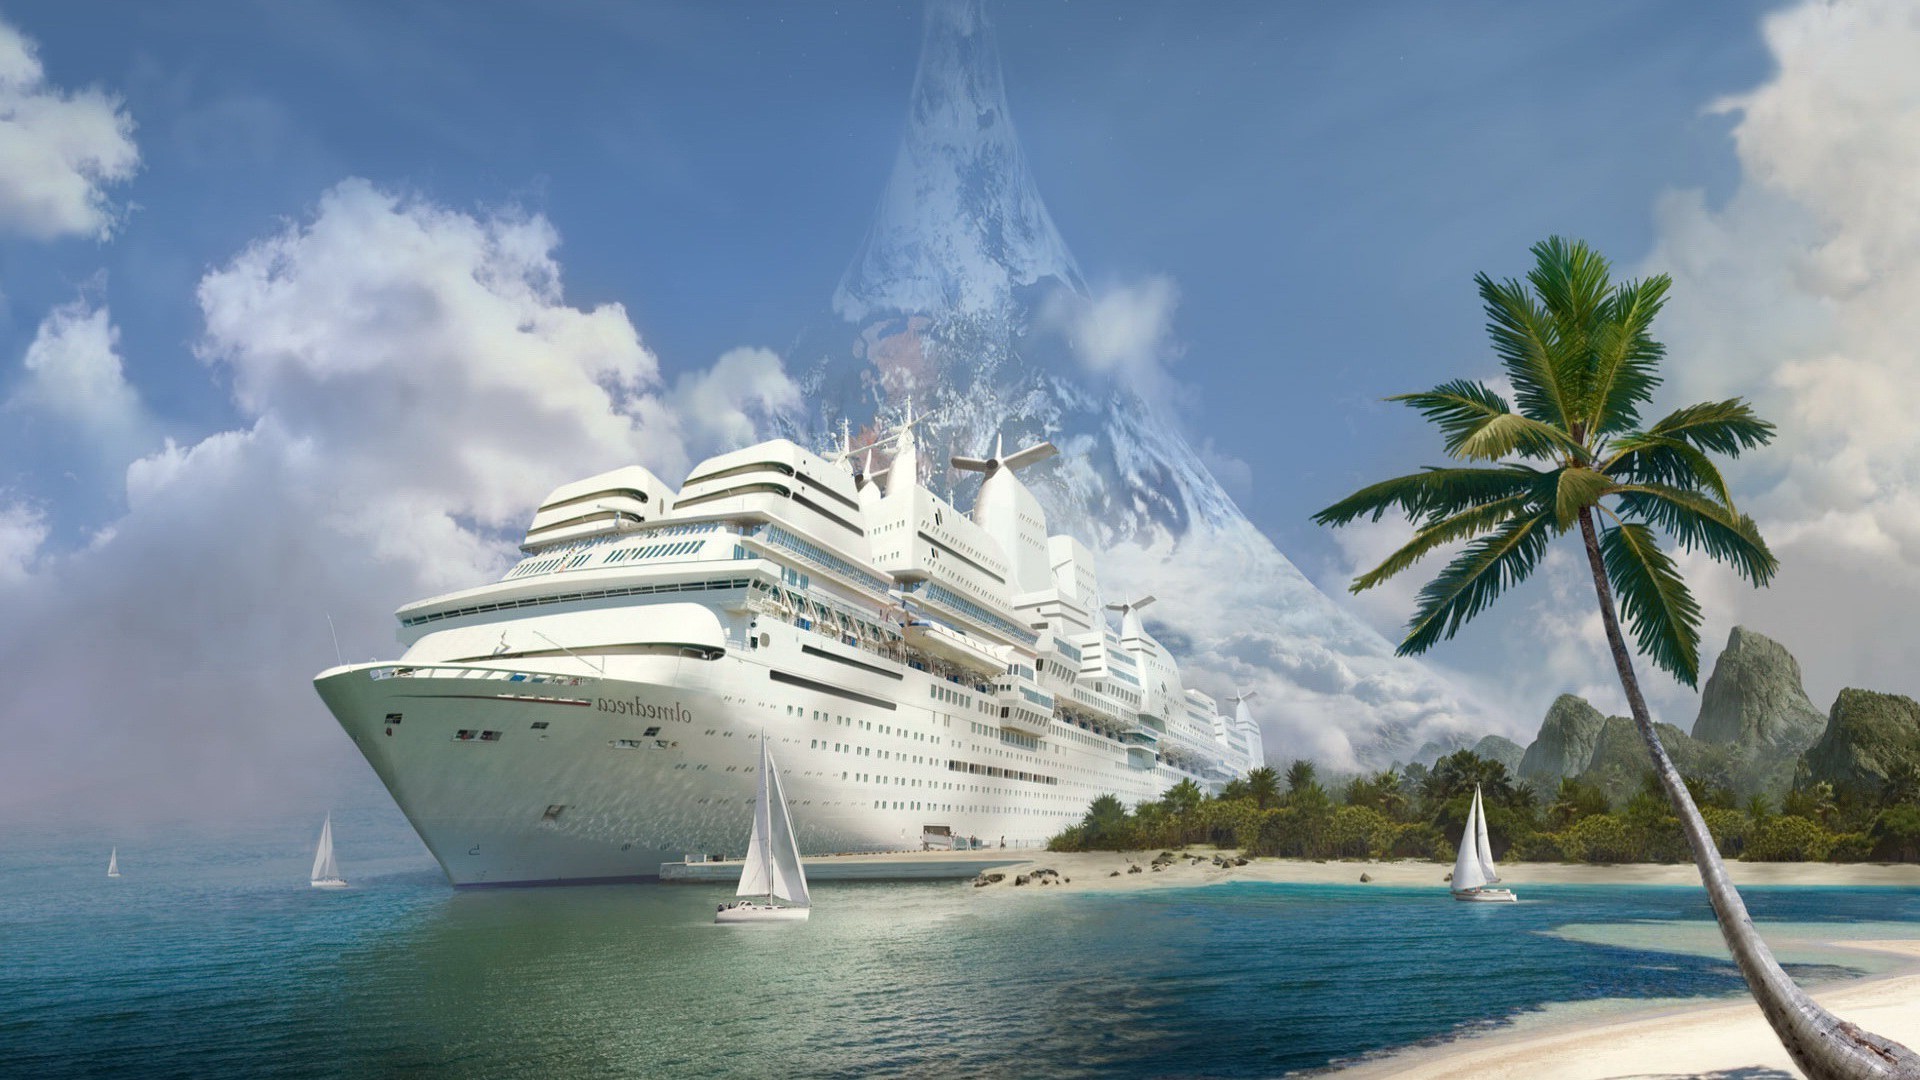 large ships and liners travel water ocean summer tropical sea sky vacation seashore beach island tourism exotic leisure